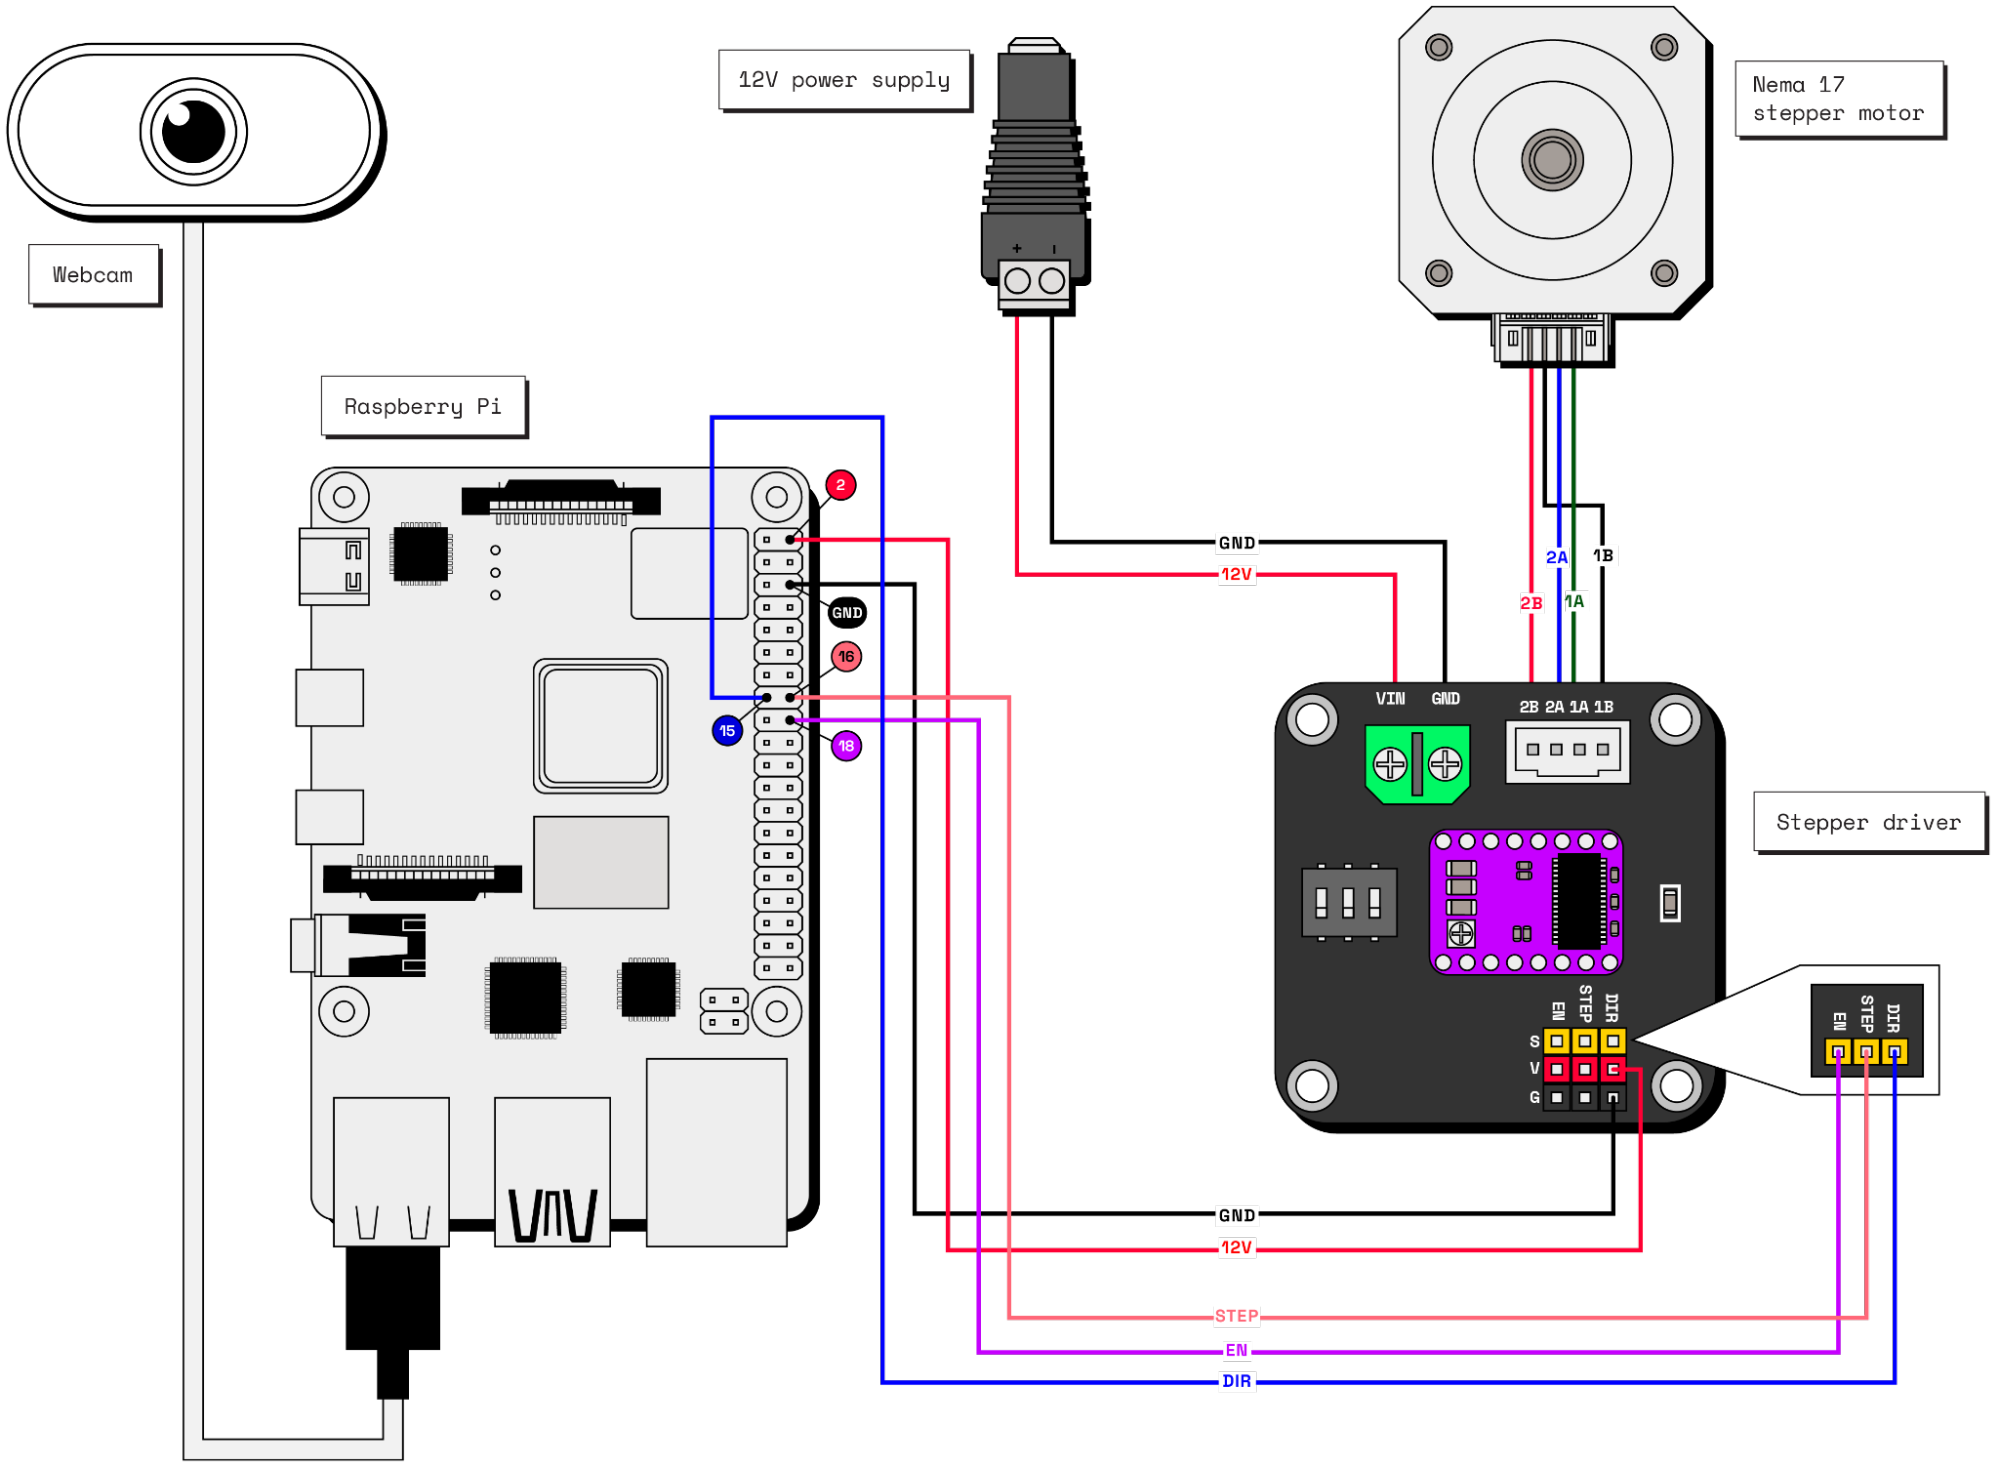 Wiring diagram for the pet feeder showing the components used and the wiring plan to connect them.